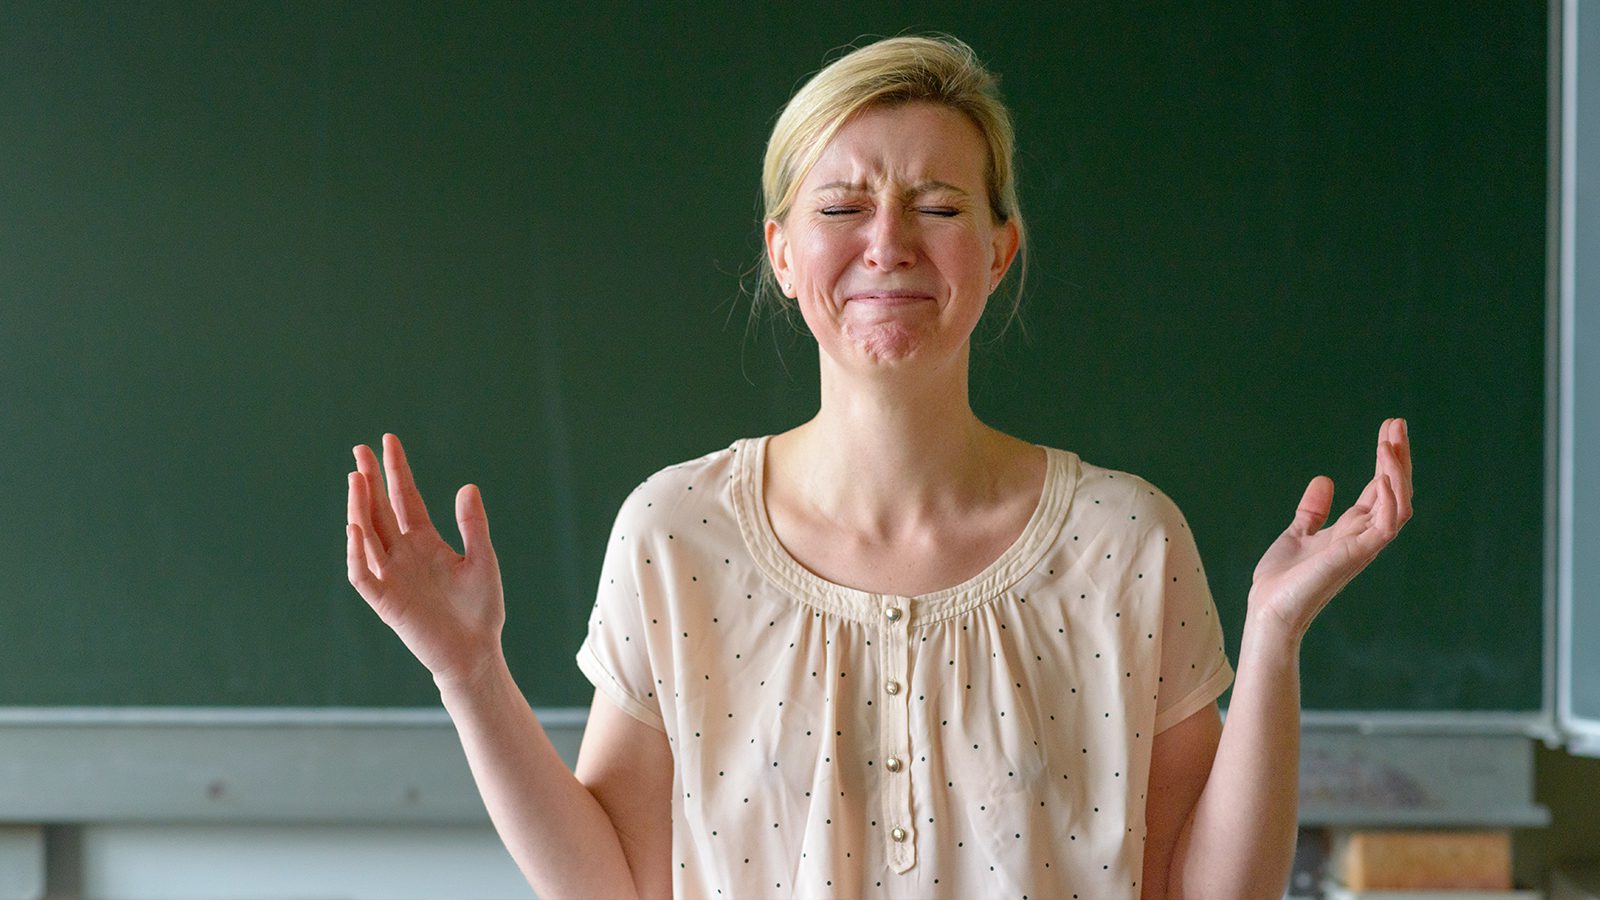 Study Explains How Teachers Have Double the Stress of Other Workers